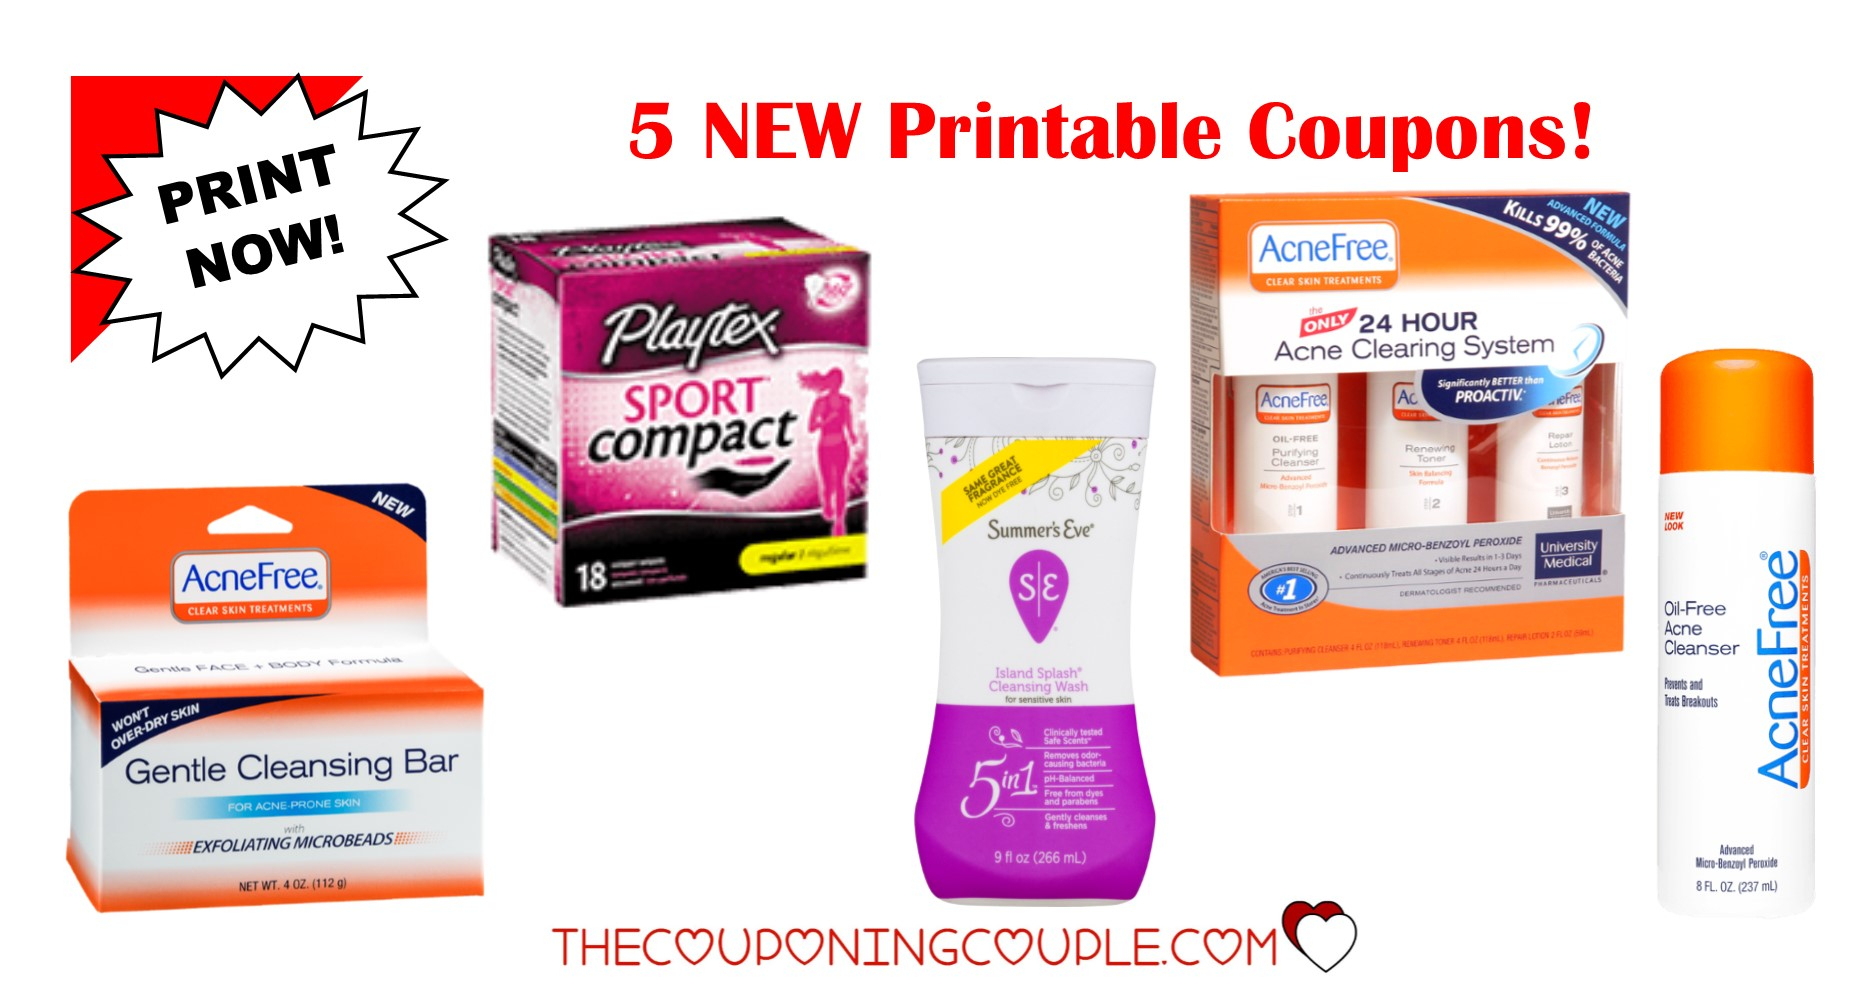 5 New Printable Coupons ~ $13.50 In Savings! Print Now! - Acne Free Coupons Printable